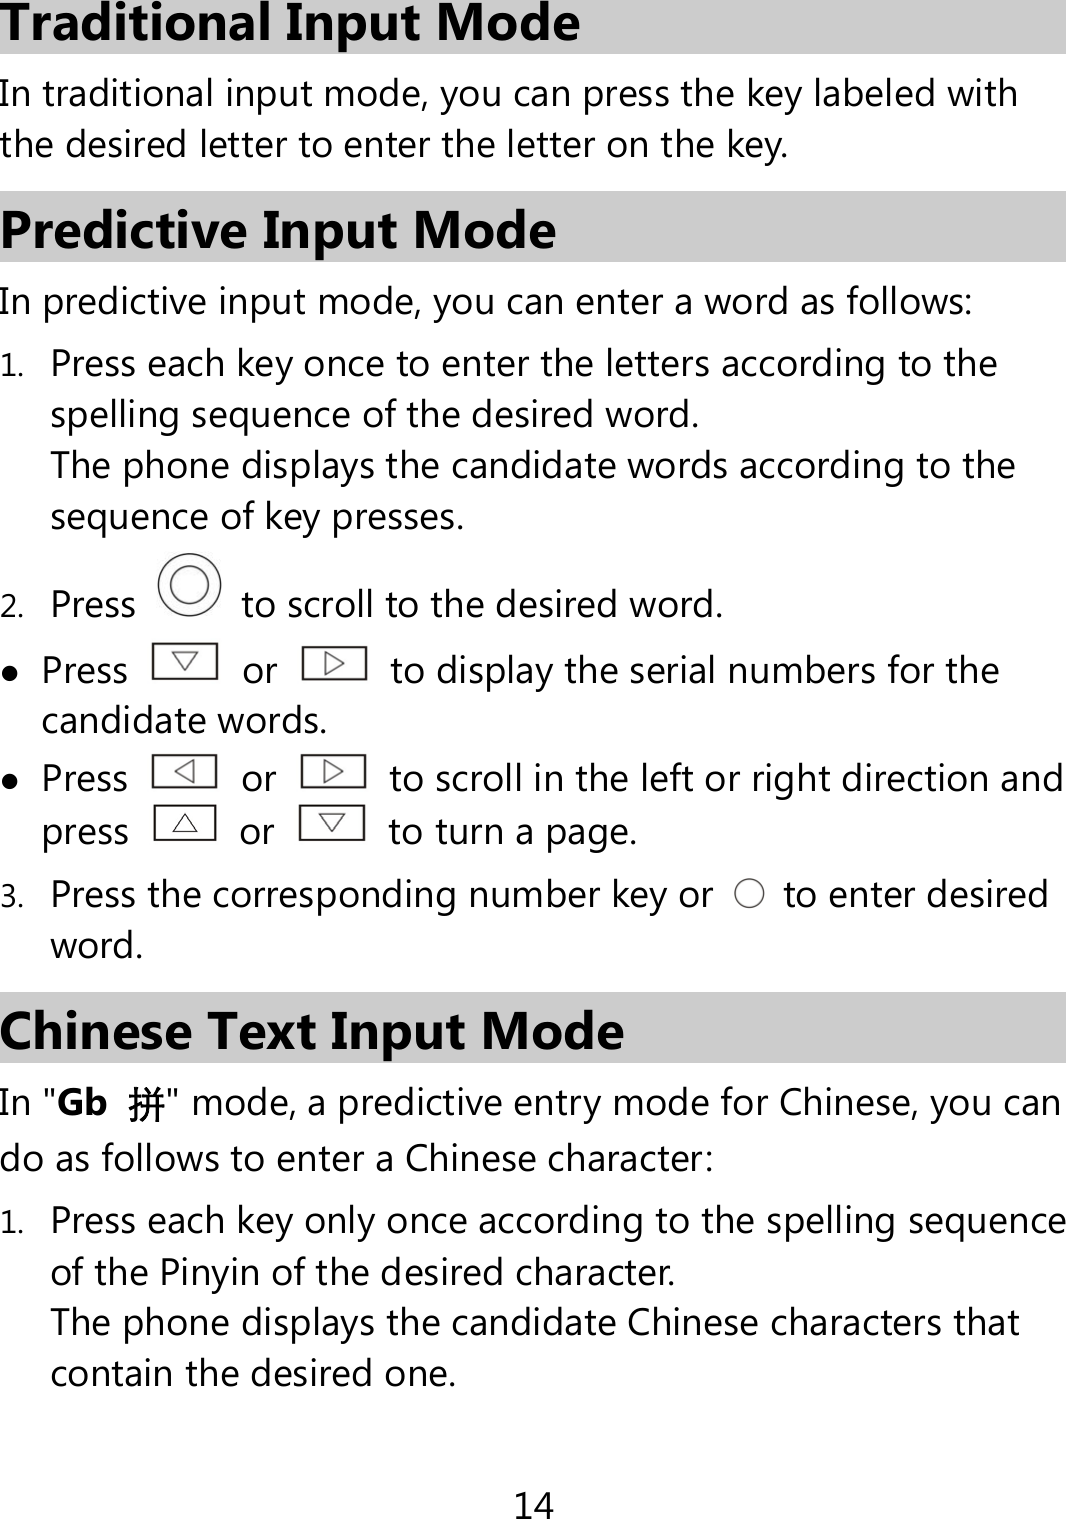 14  Traditional Input Mode In traditional input mode, you can press the key labeled with the desired letter to enter the letter on the key.   Predictive Input Mode In predictive input mode, you can enter a word as follows: 1. Press each key once to enter the letters according to the spelling sequence of the desired word. The phone displays the candidate words according to the sequence of key presses. 2. Press    to scroll to the desired word.  Press   or    to display the serial numbers for the candidate words.  Press   or    to scroll in the left or right direction and press   or    to turn a page. 3. Press the corresponding number key or    to enter desired word. Chinese Text Input Mode In &quot;Gb  拼&quot; mode, a predictive entry mode for Chinese, you can do as follows to enter a Chinese character: 1. Press each key only once according to the spelling sequence of the Pinyin of the desired character. The phone displays the candidate Chinese characters that contain the desired one. 